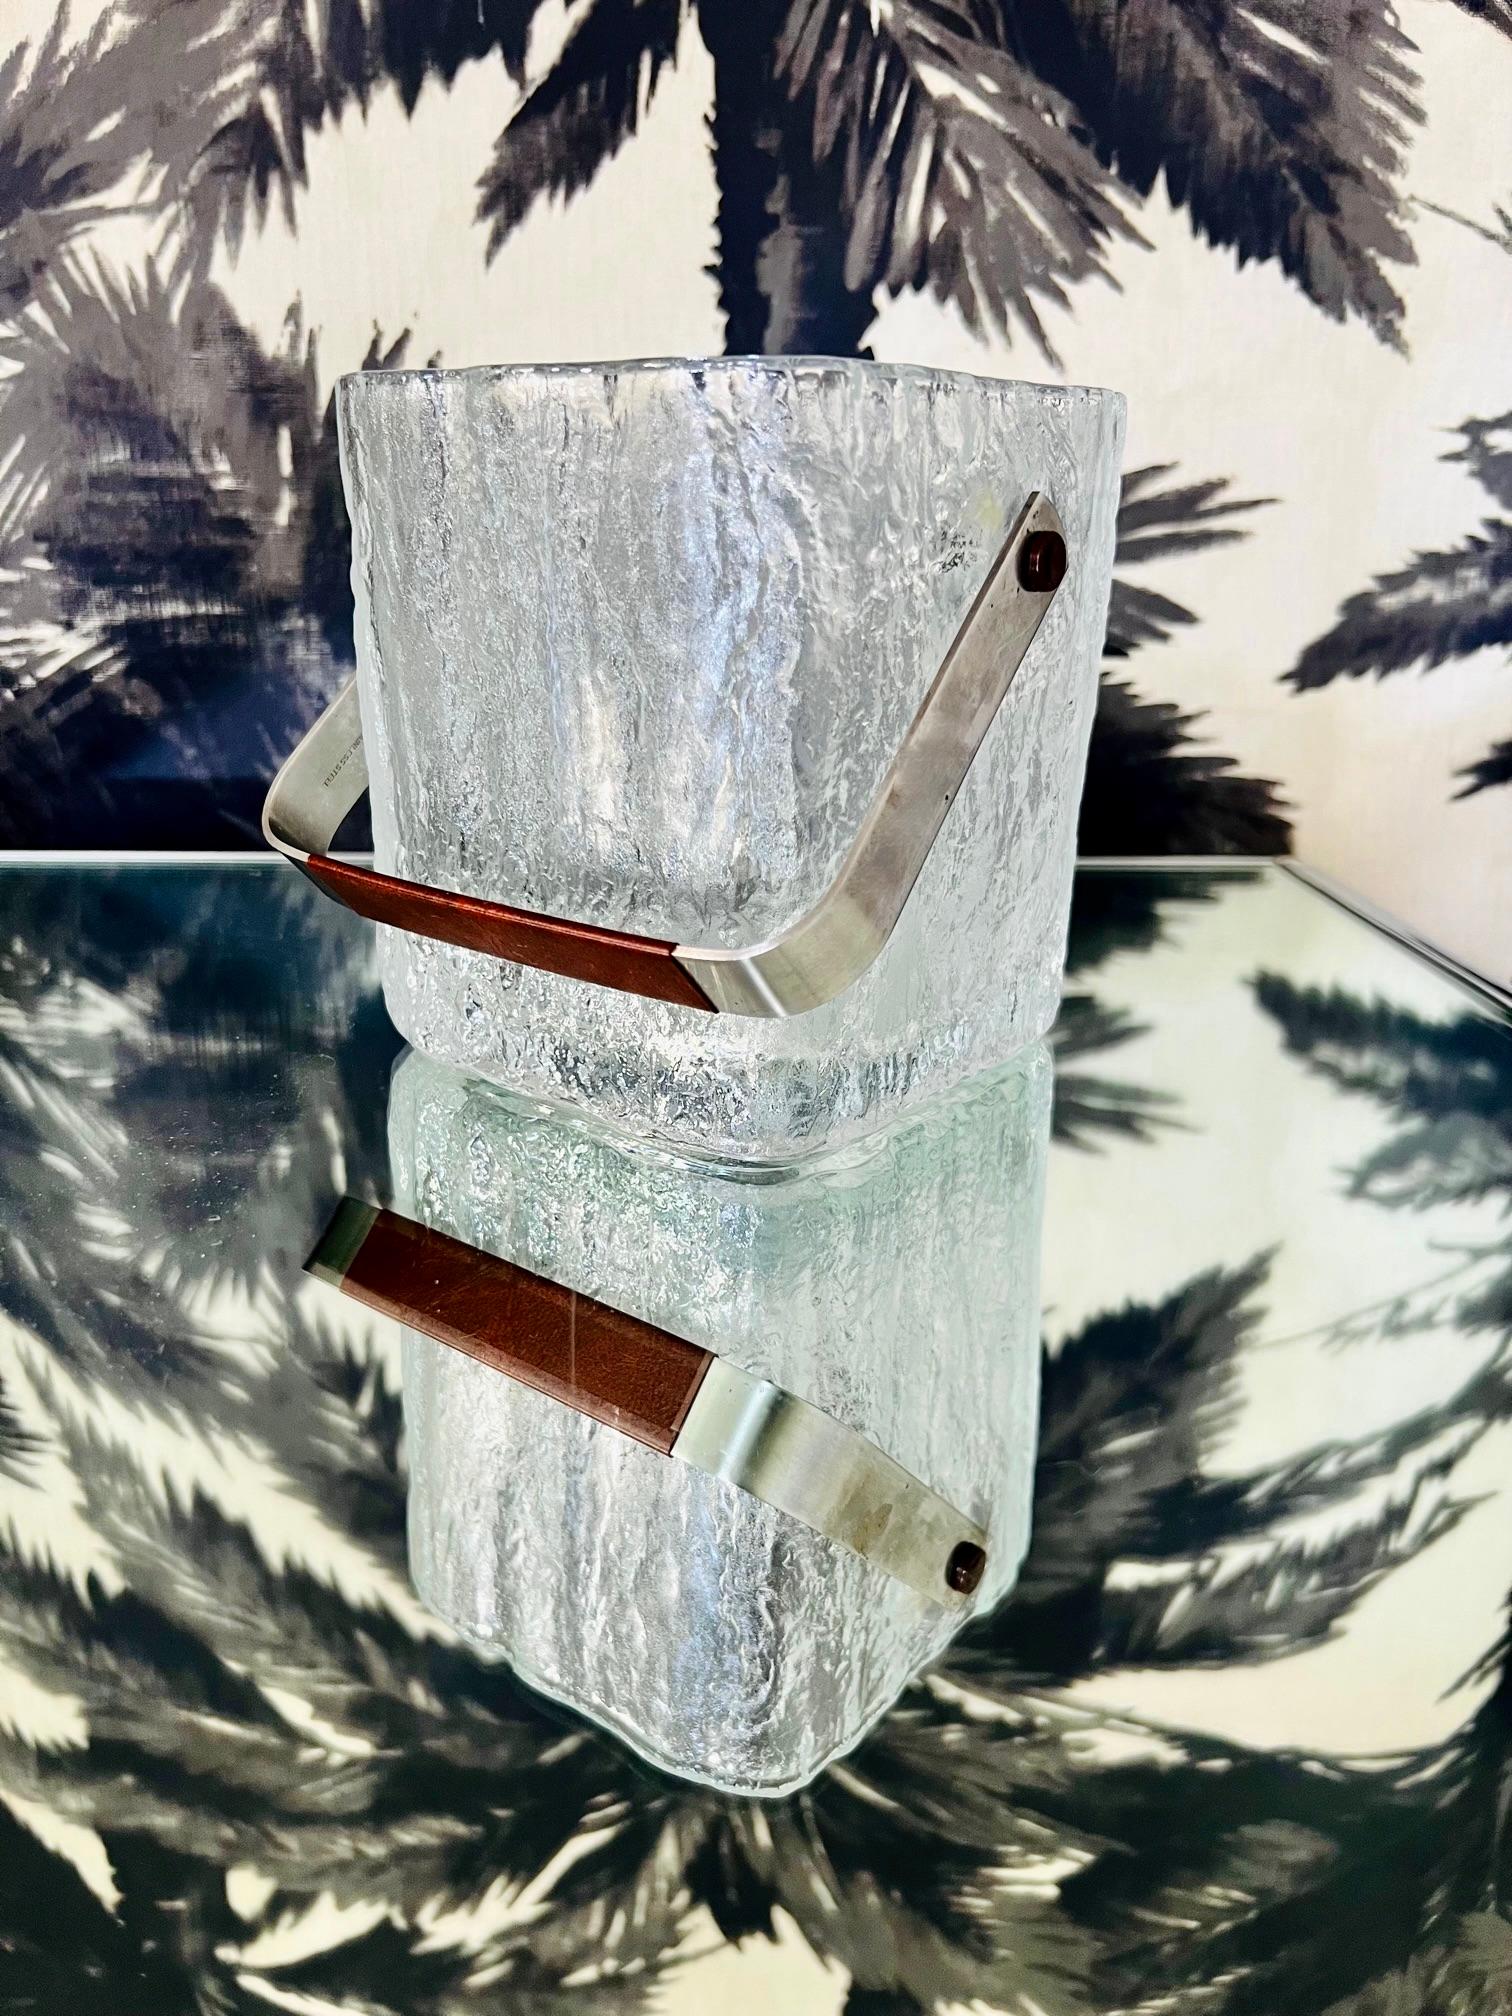 Japanese Mid-Century Modern Ice Bucket with Textured Ice Glass, Japan, circa 1960s For Sale